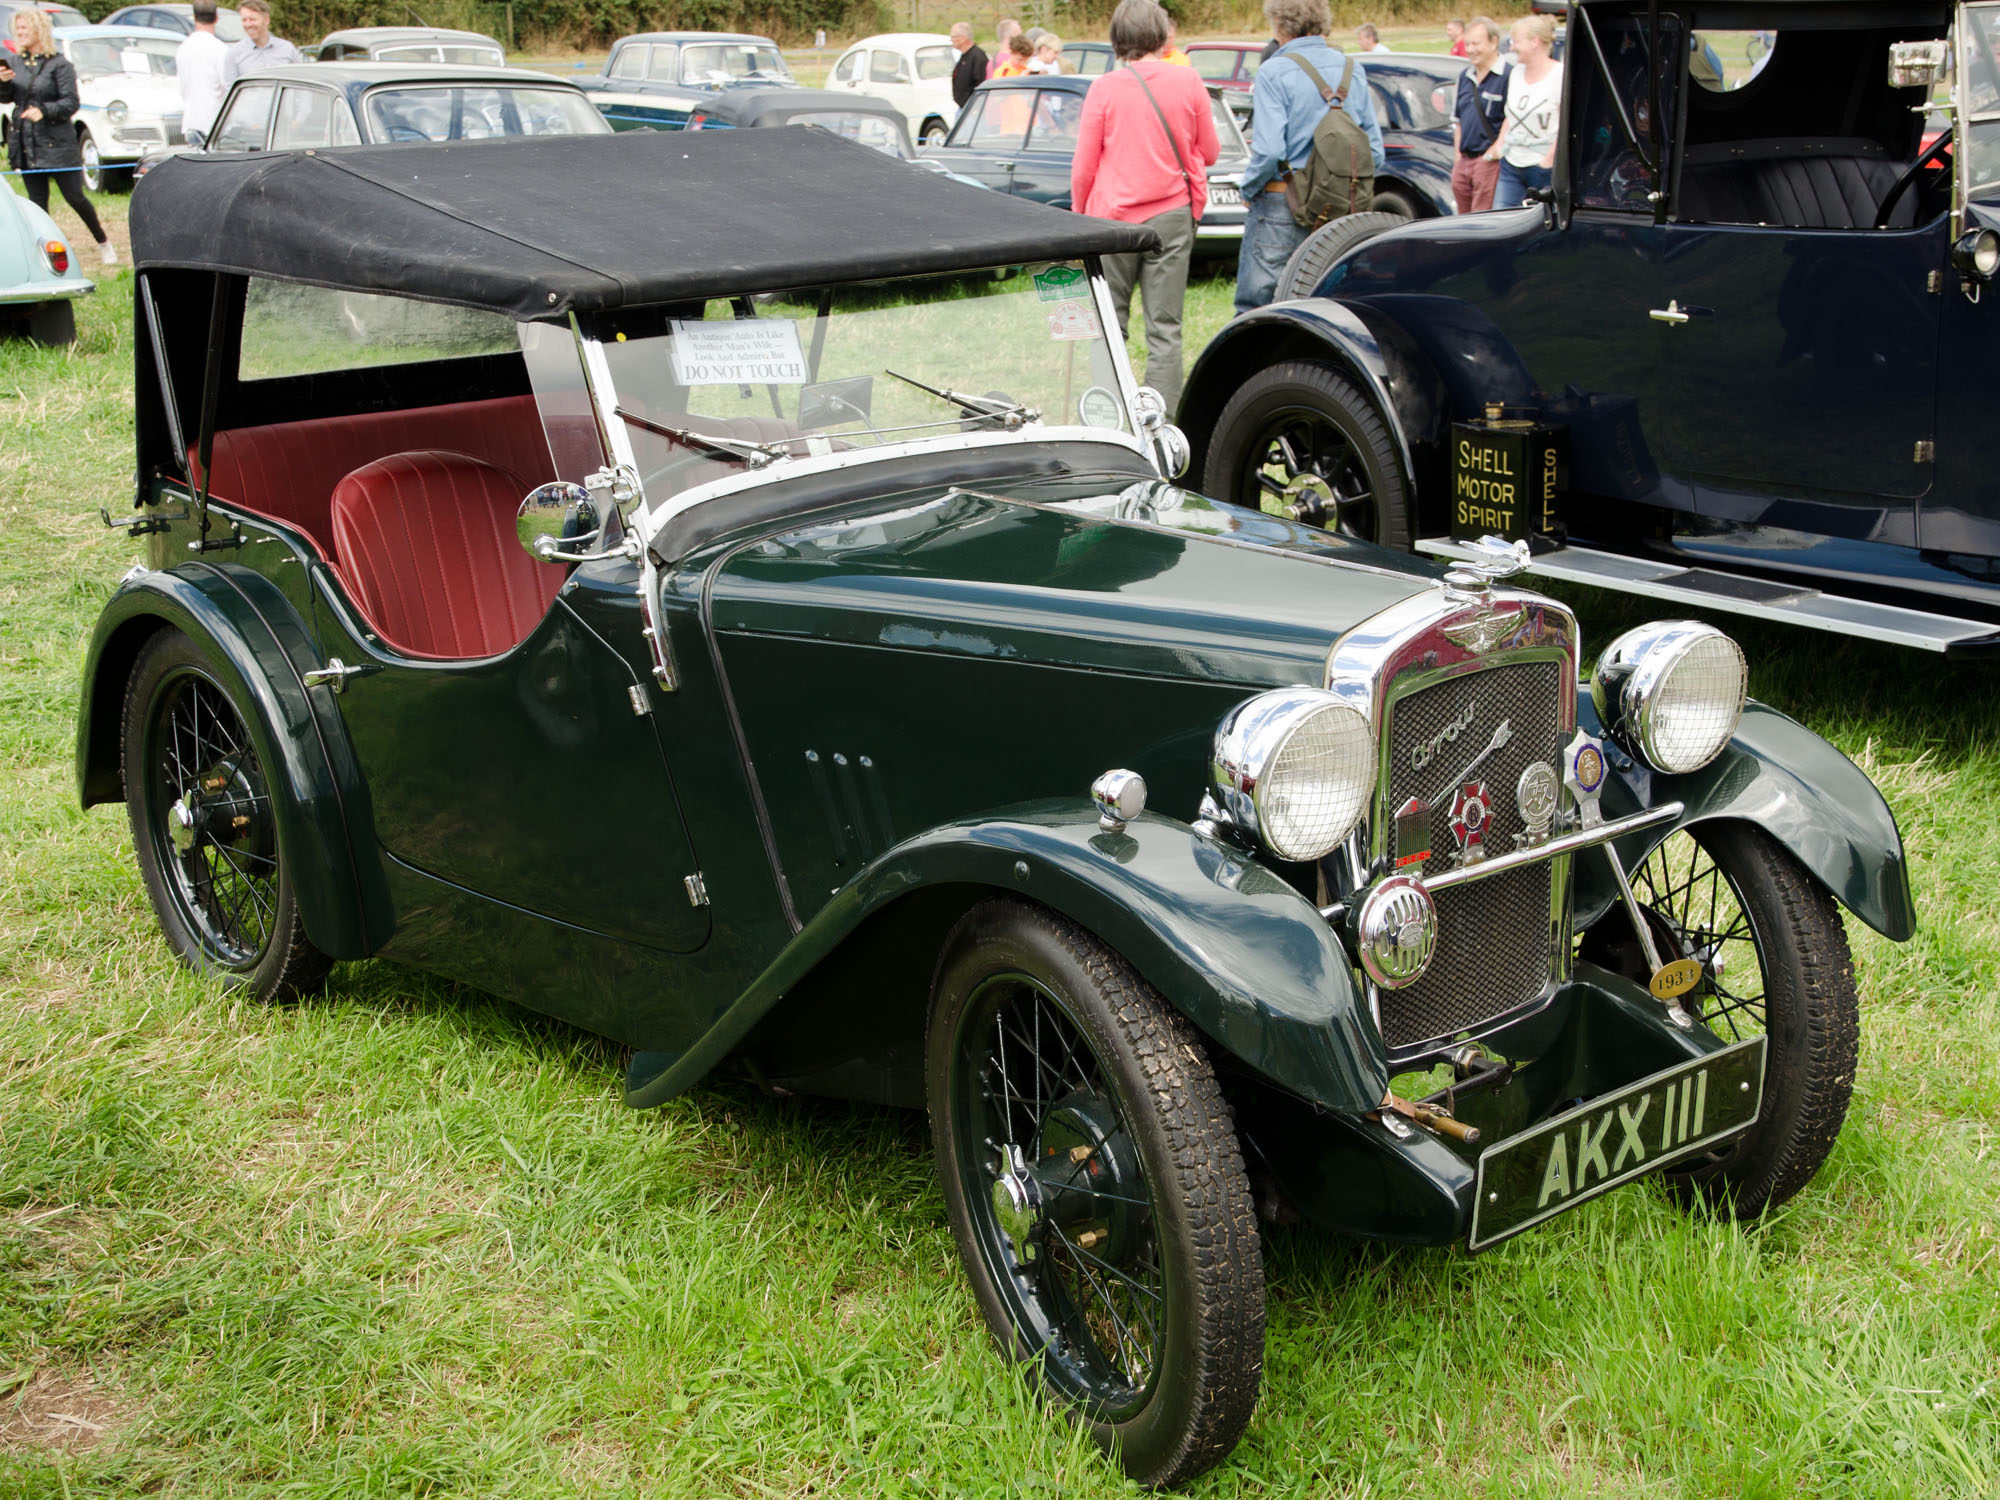 a vintage green car on display at an antique auto show